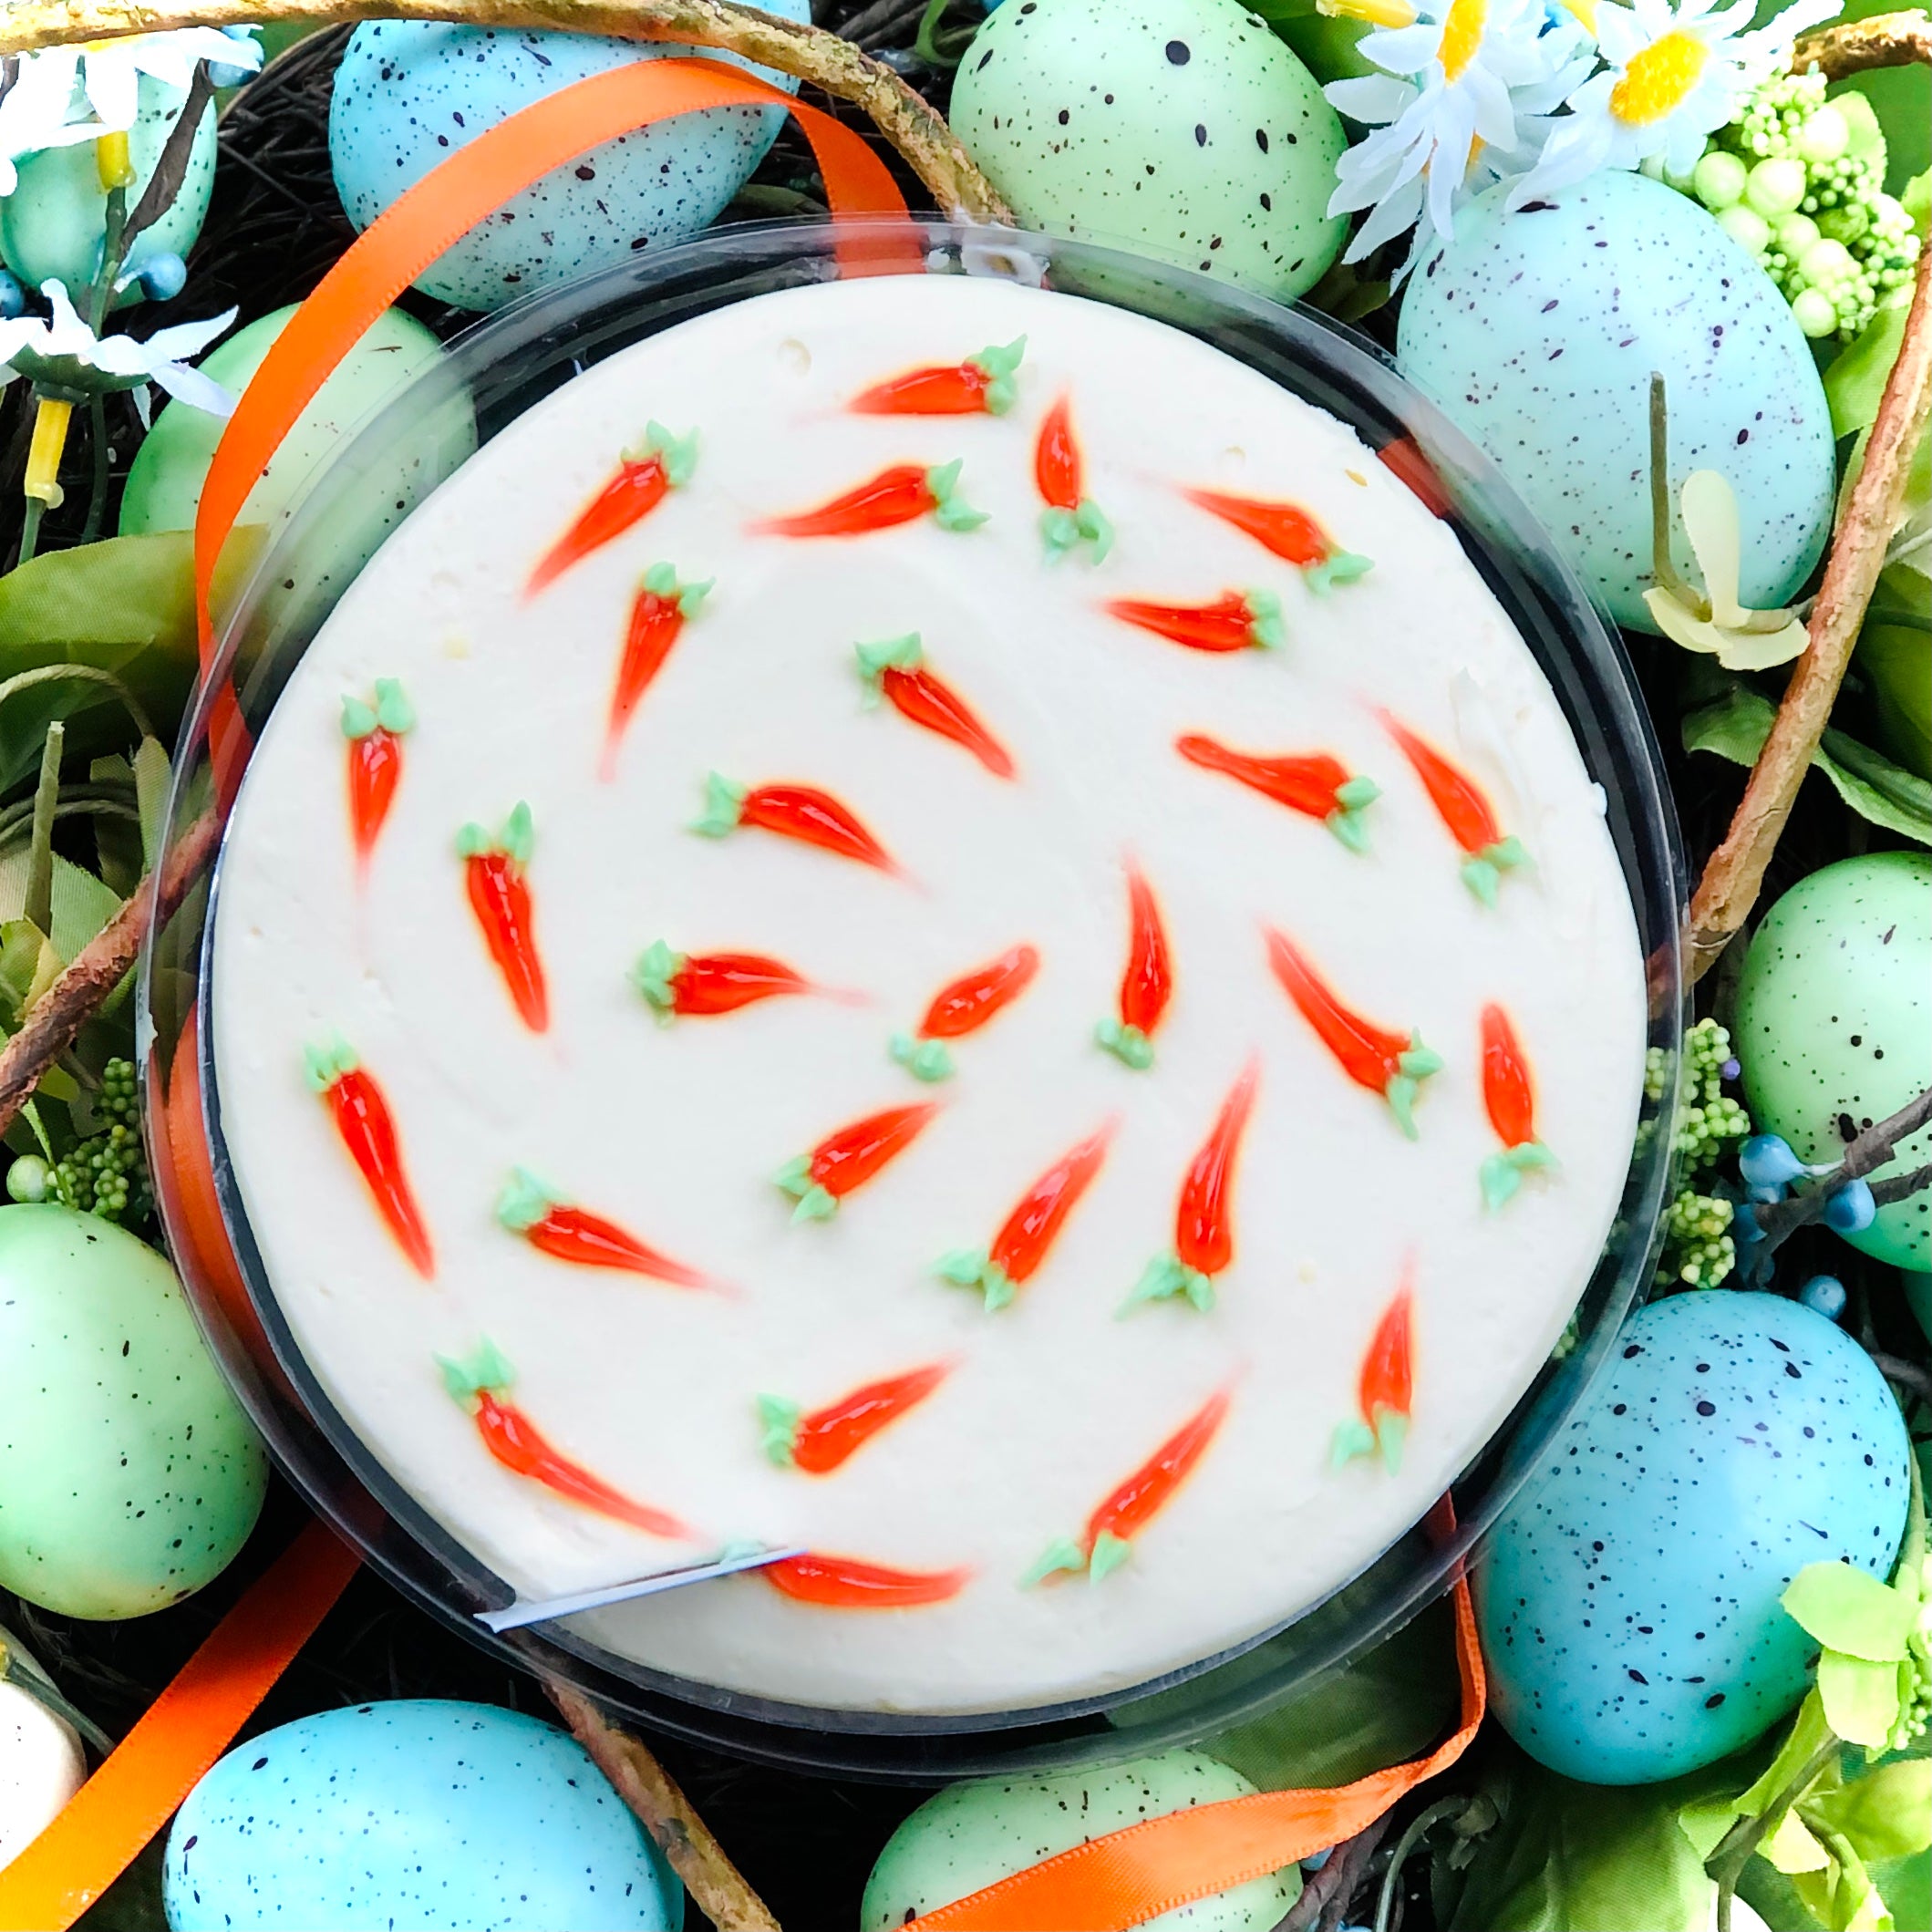 Impressionistic orange carrots on top of an Easter Carrot Cake sitting within blue green eggs.